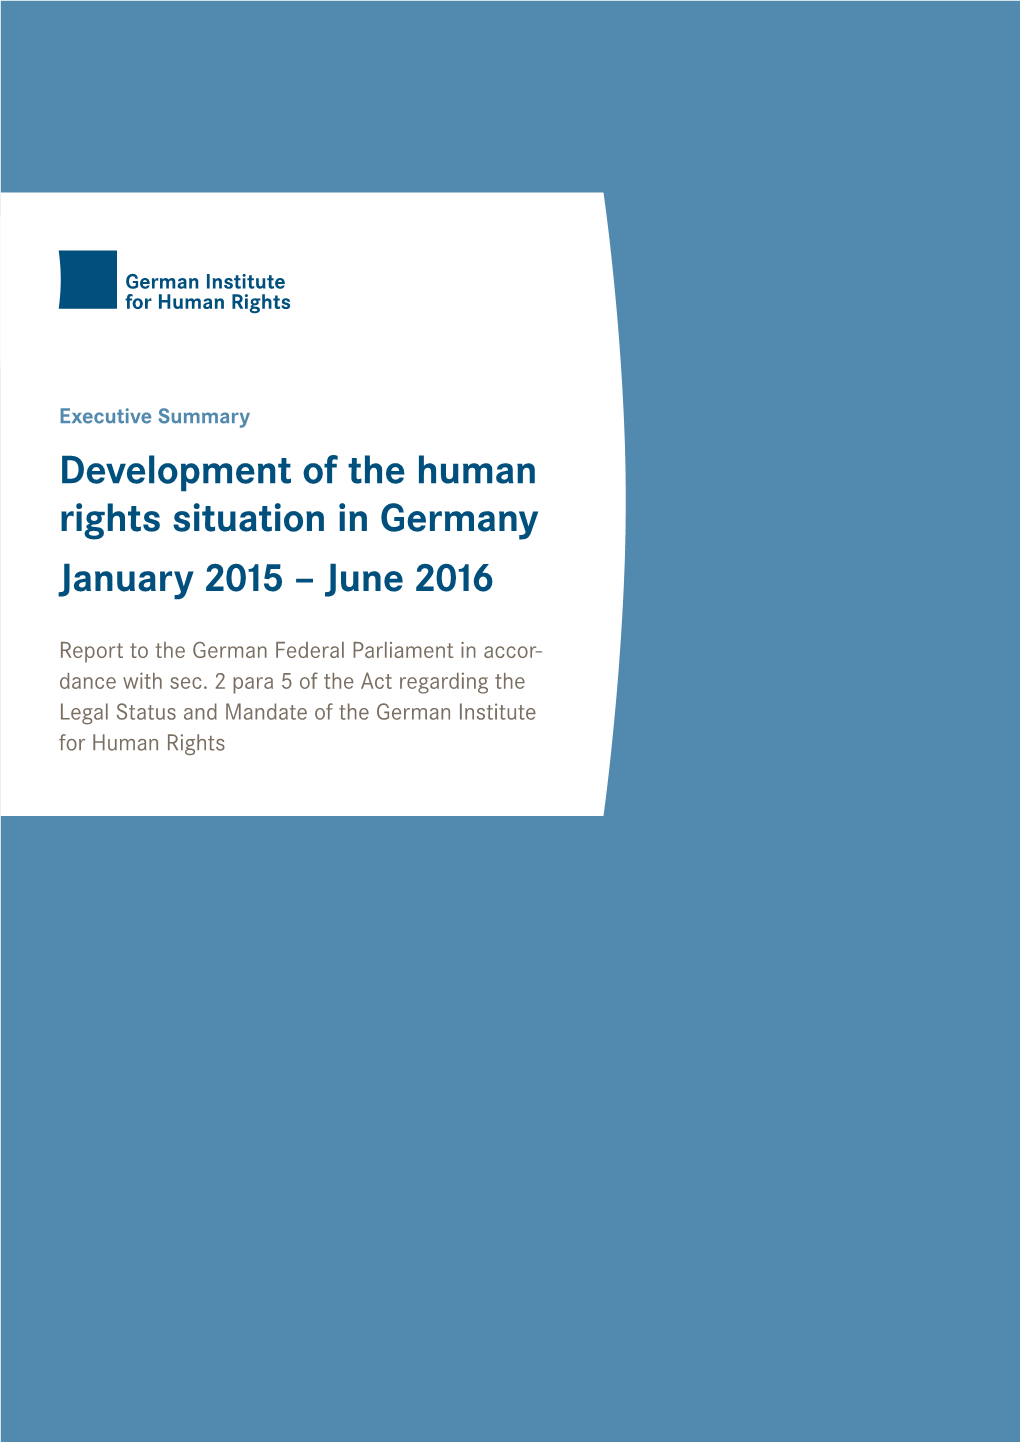 Development of the Human Rights Situation in Germany. January 2015 – June 2016. Executive Summary